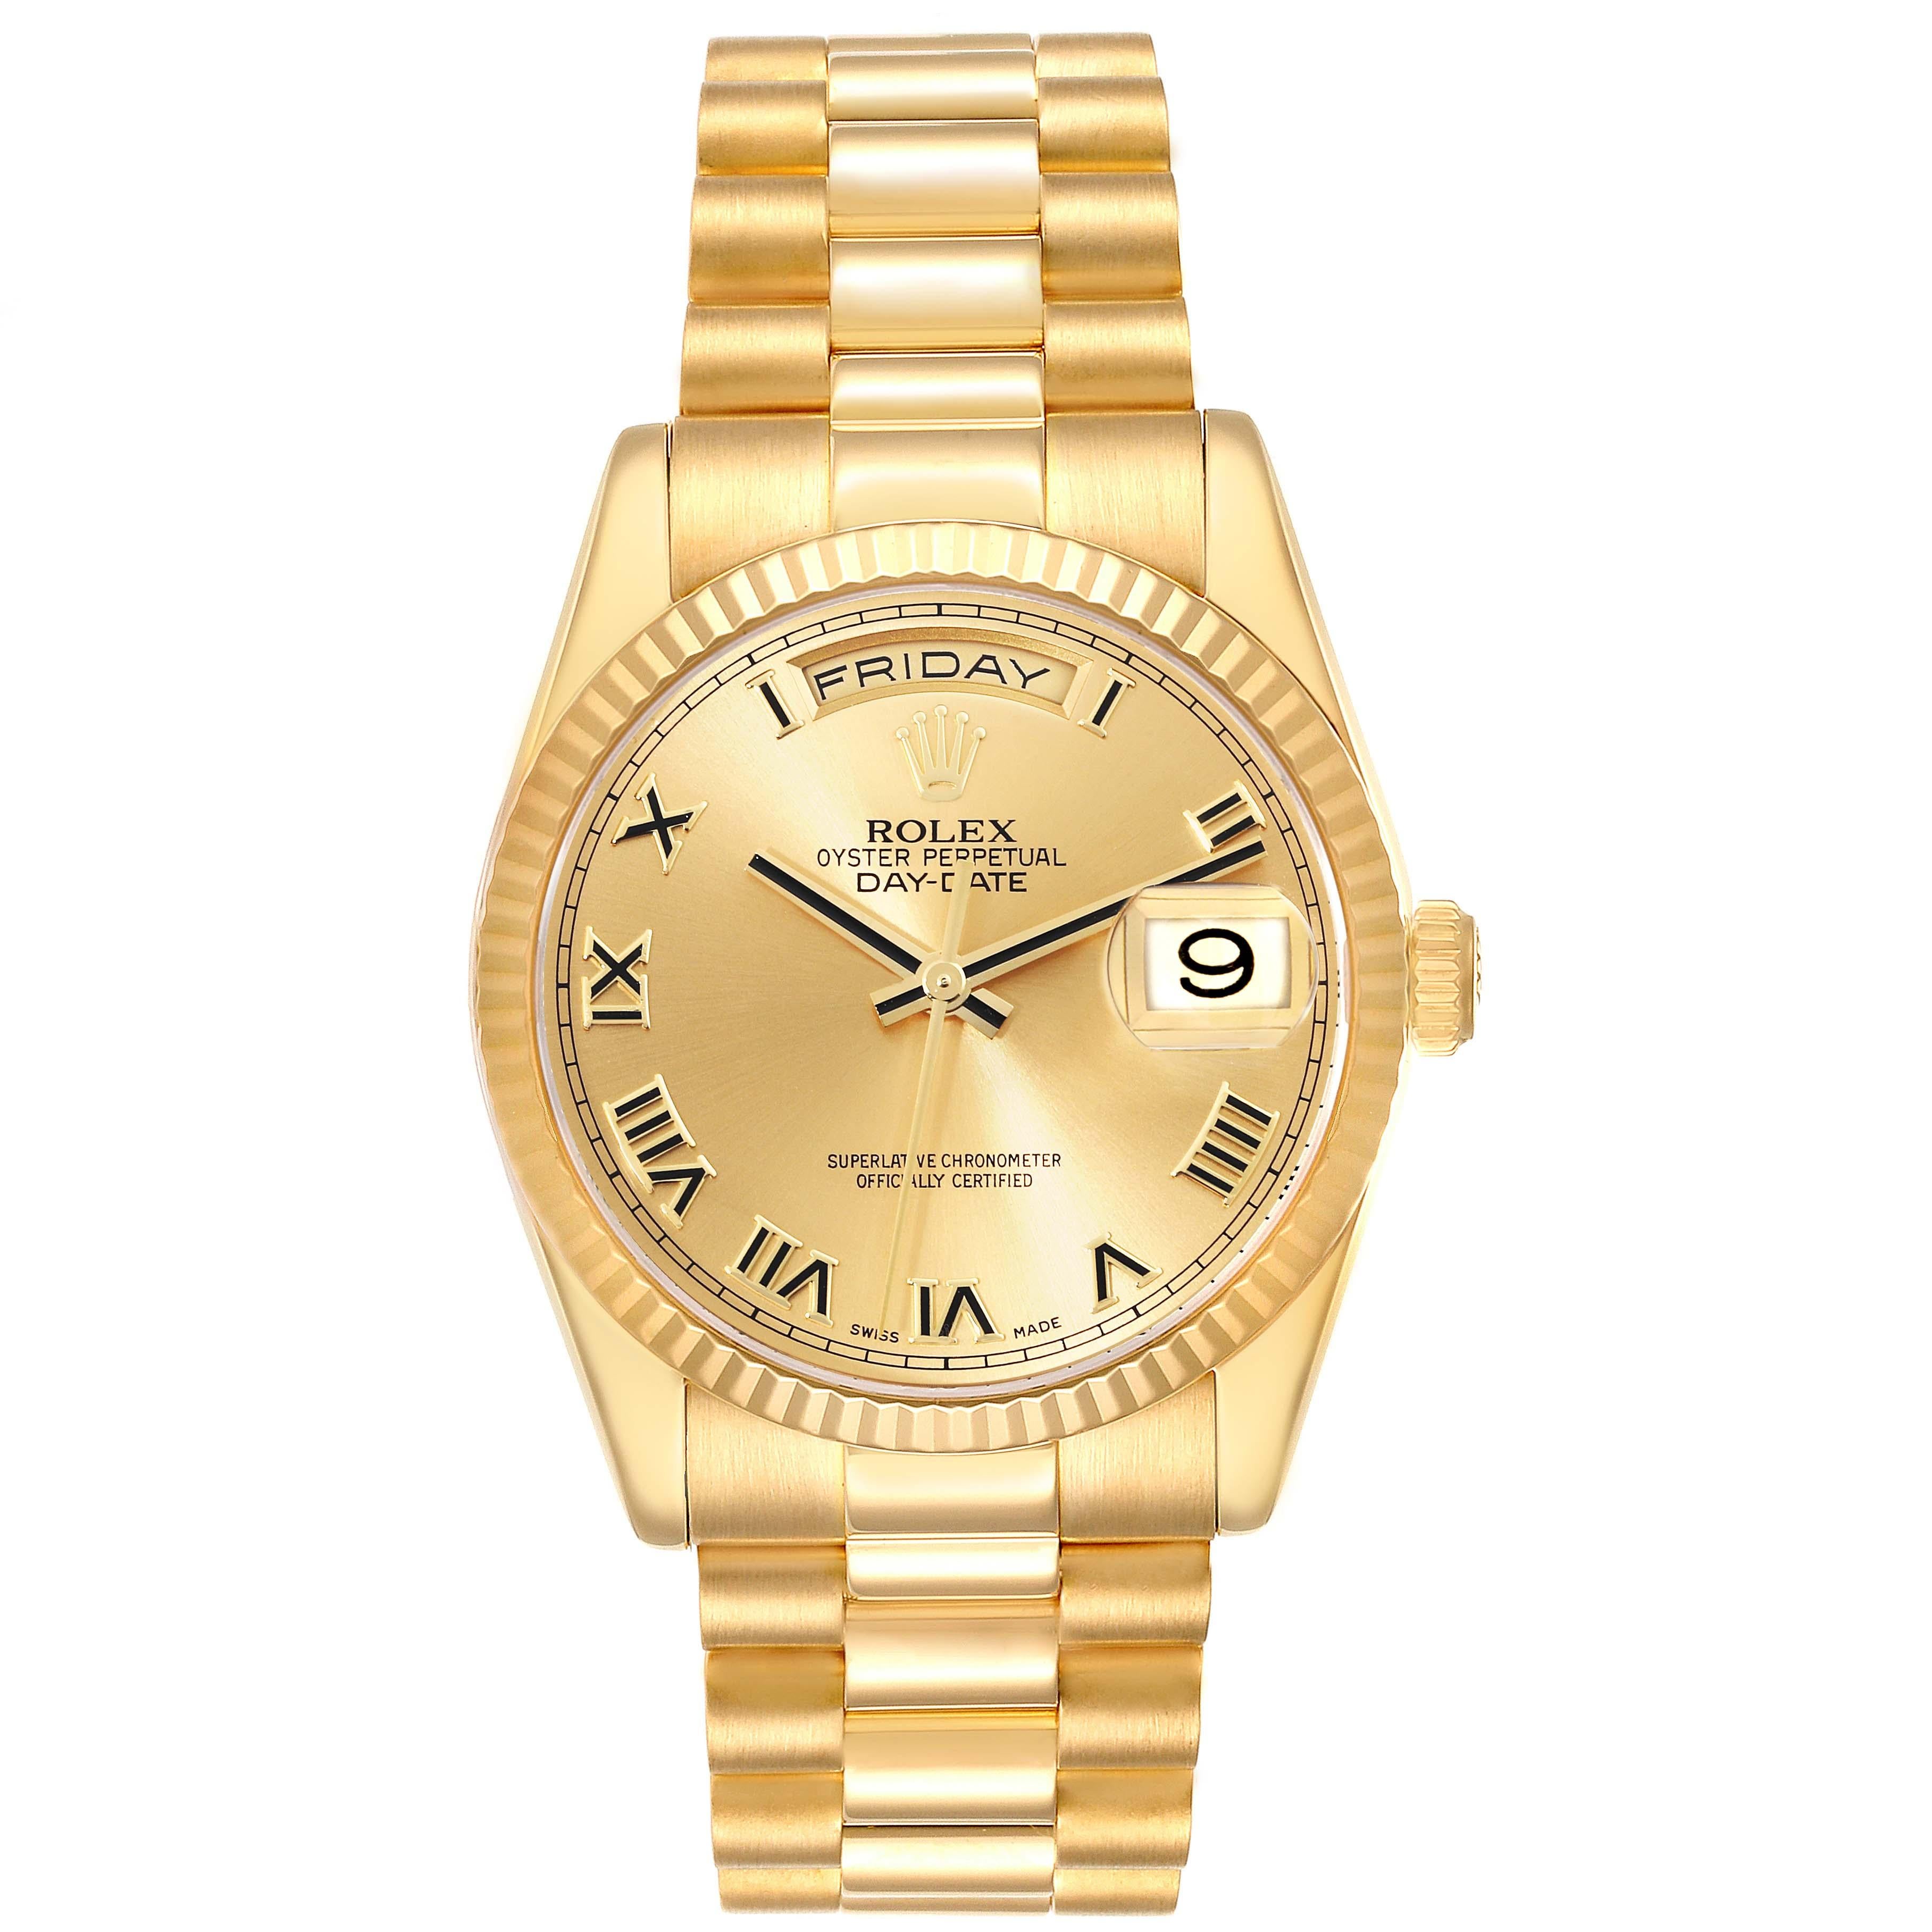 Rolex Day Date President Yellow Gold Champagne Dial Mens Watch 118238. Officially certified chronometer automatic self-winding movement. Double quick set function. 18k yellow gold oyster case 36.0 mm in diameter. Rolex logo on the crown. 18K yellow